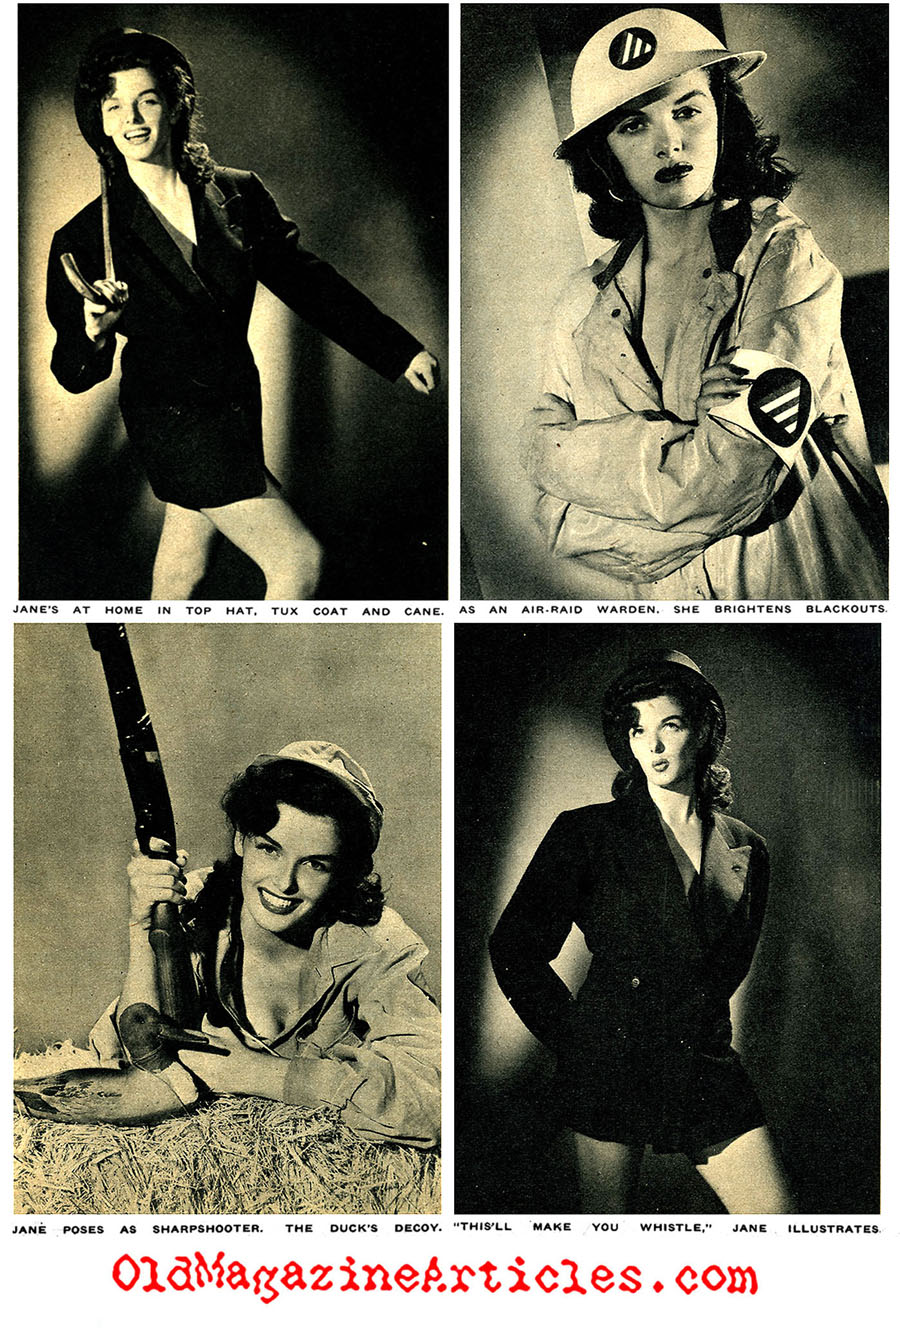 The Missing Star: Jane Russell (Pic Magazine, 1943)